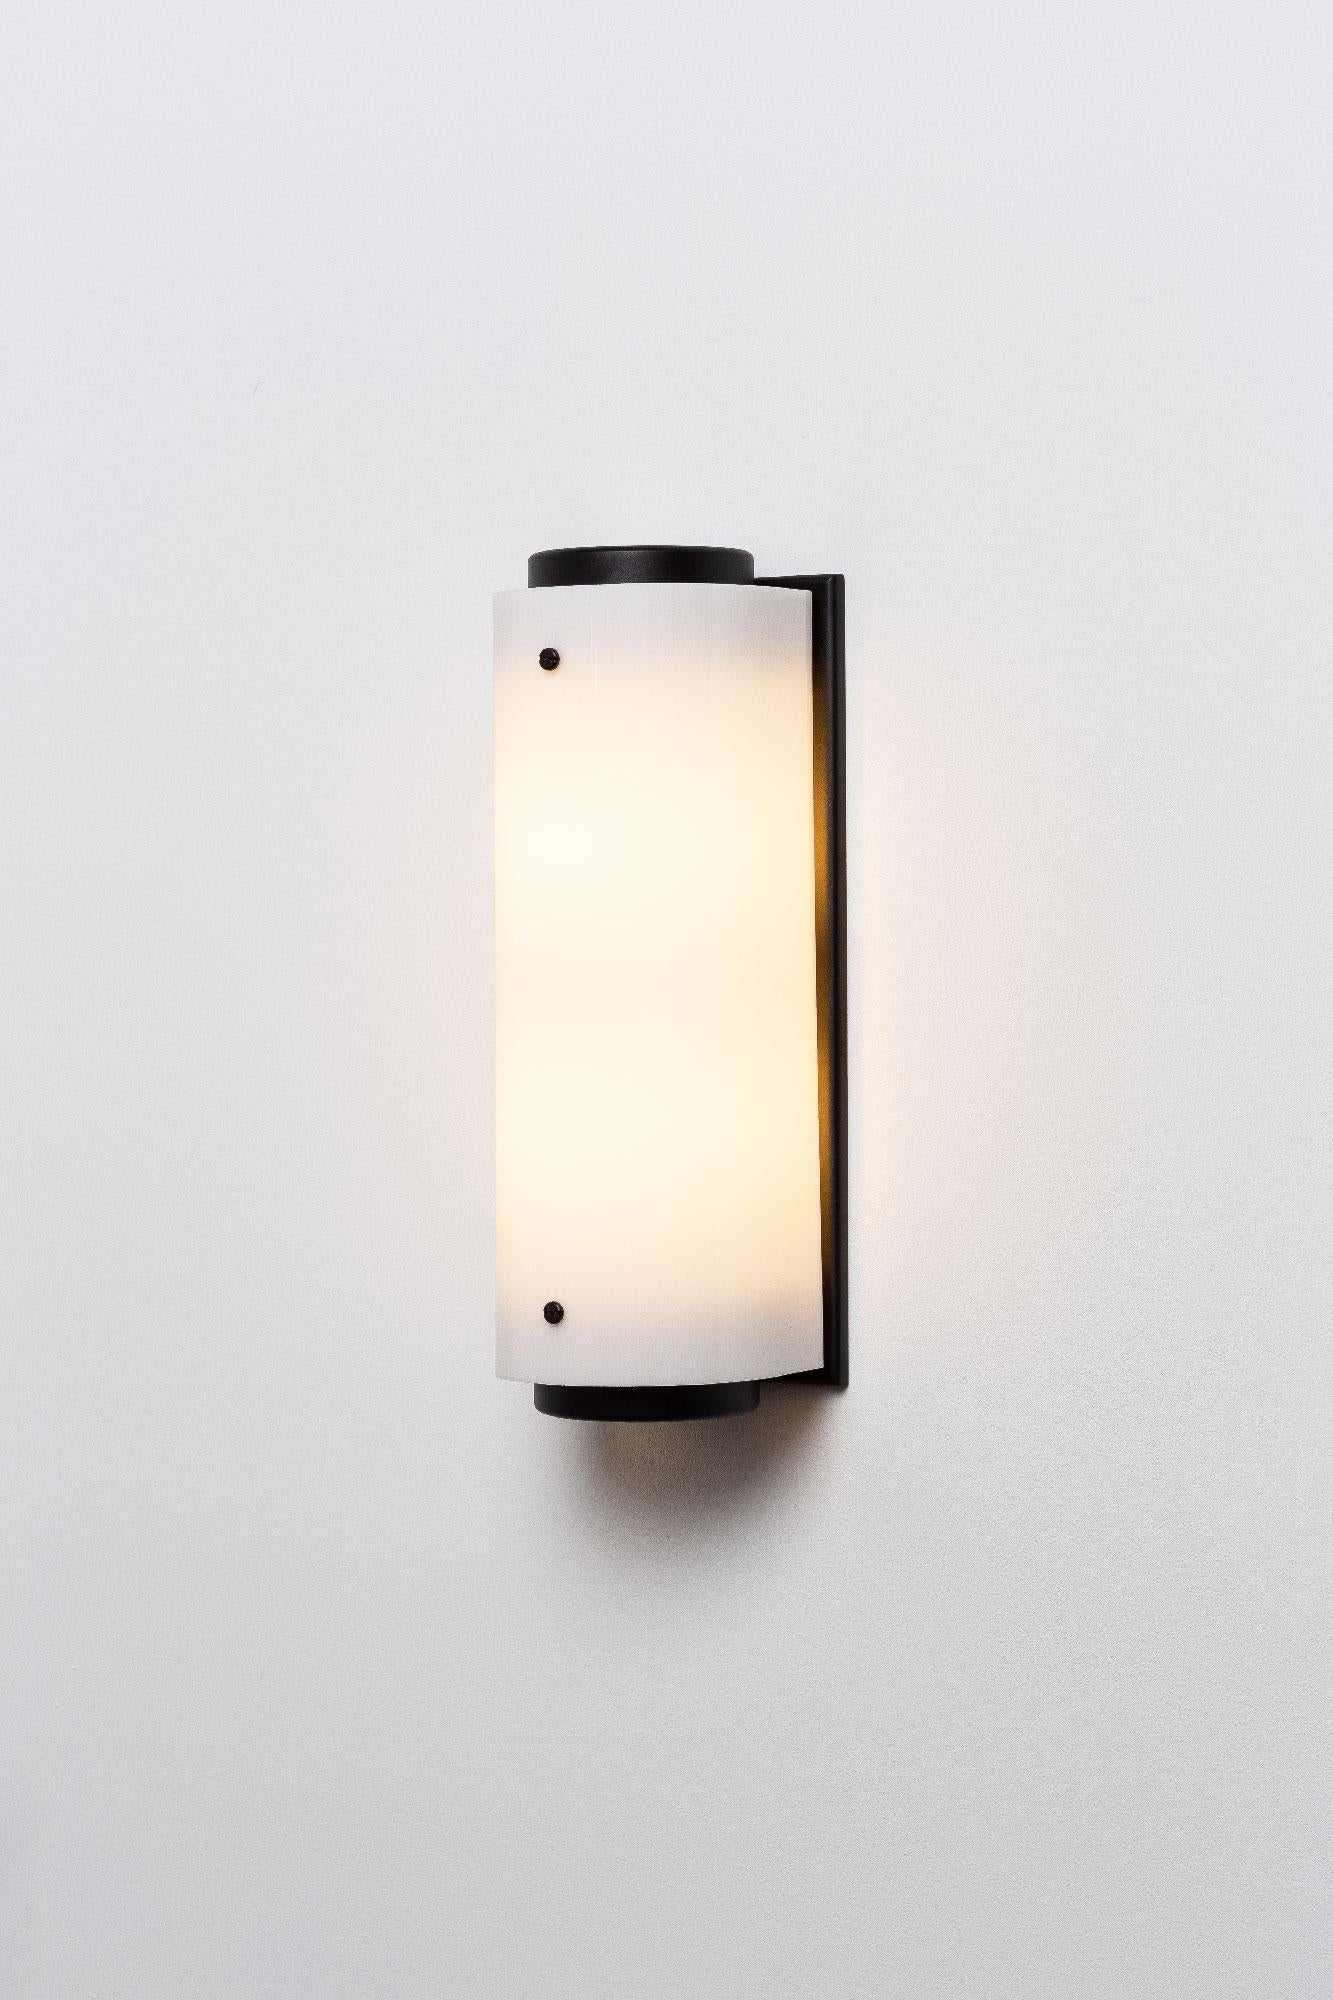 The arc sconce is made of a solid black body and backplate with a white Lucite shade and black screws.

Small: W 5.25in (13.5cm) x D 5.25in (13.5cm) x H 12in (30.5cm)

(2) 60W medium base socket
Raw brass and white Lucite
Handmade in LA
UL listed /